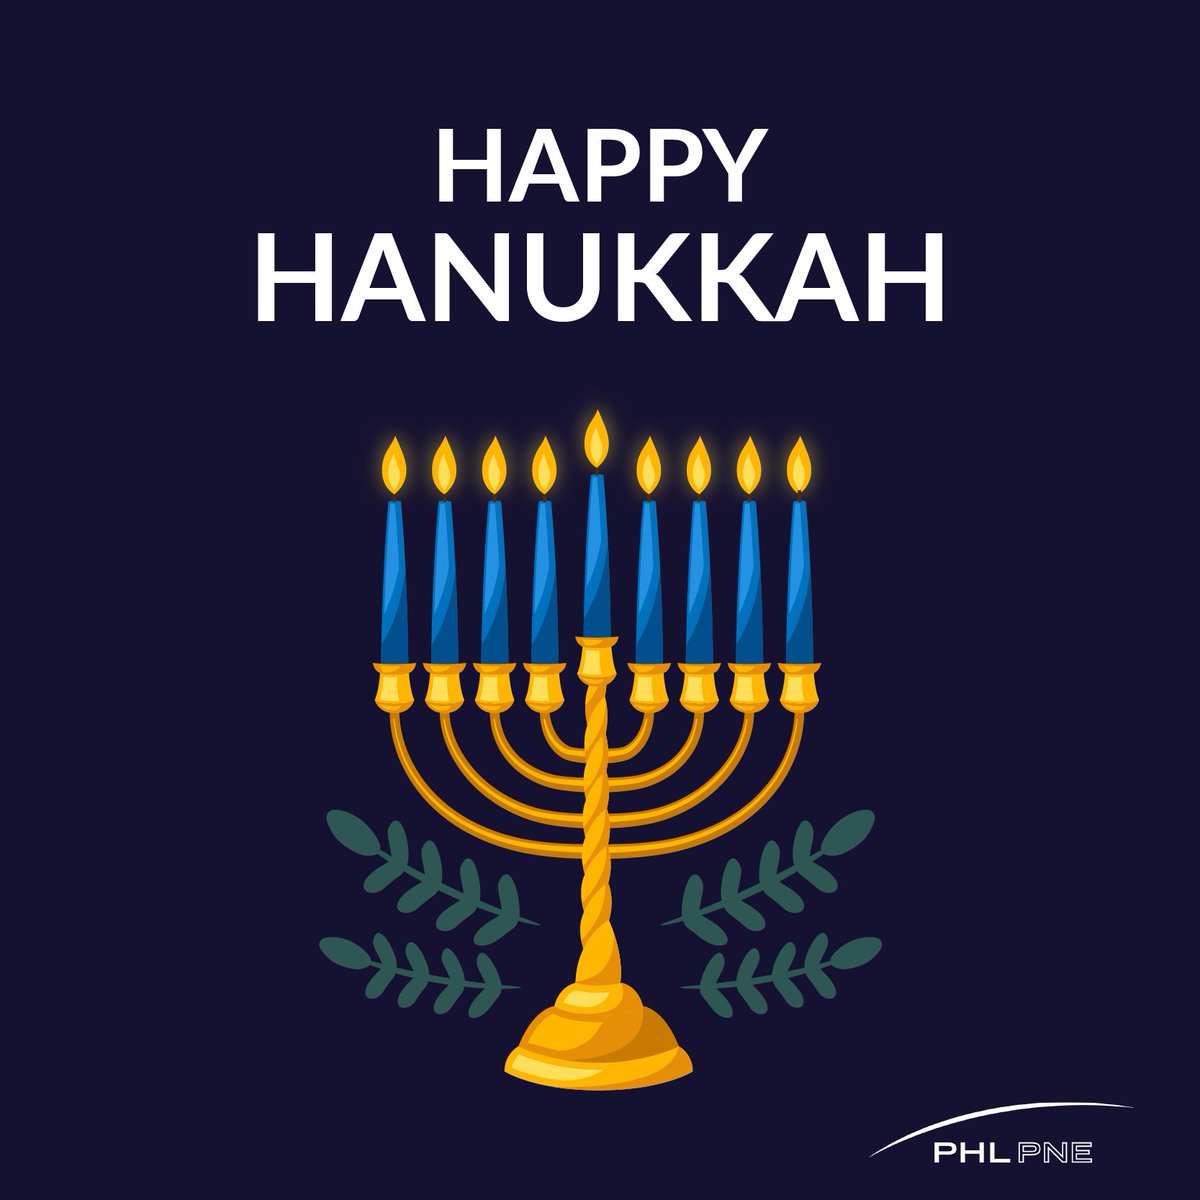 Happy Hanukkah from #PHLAirport! May you enjoy this Hanukkah season filled with love and light.